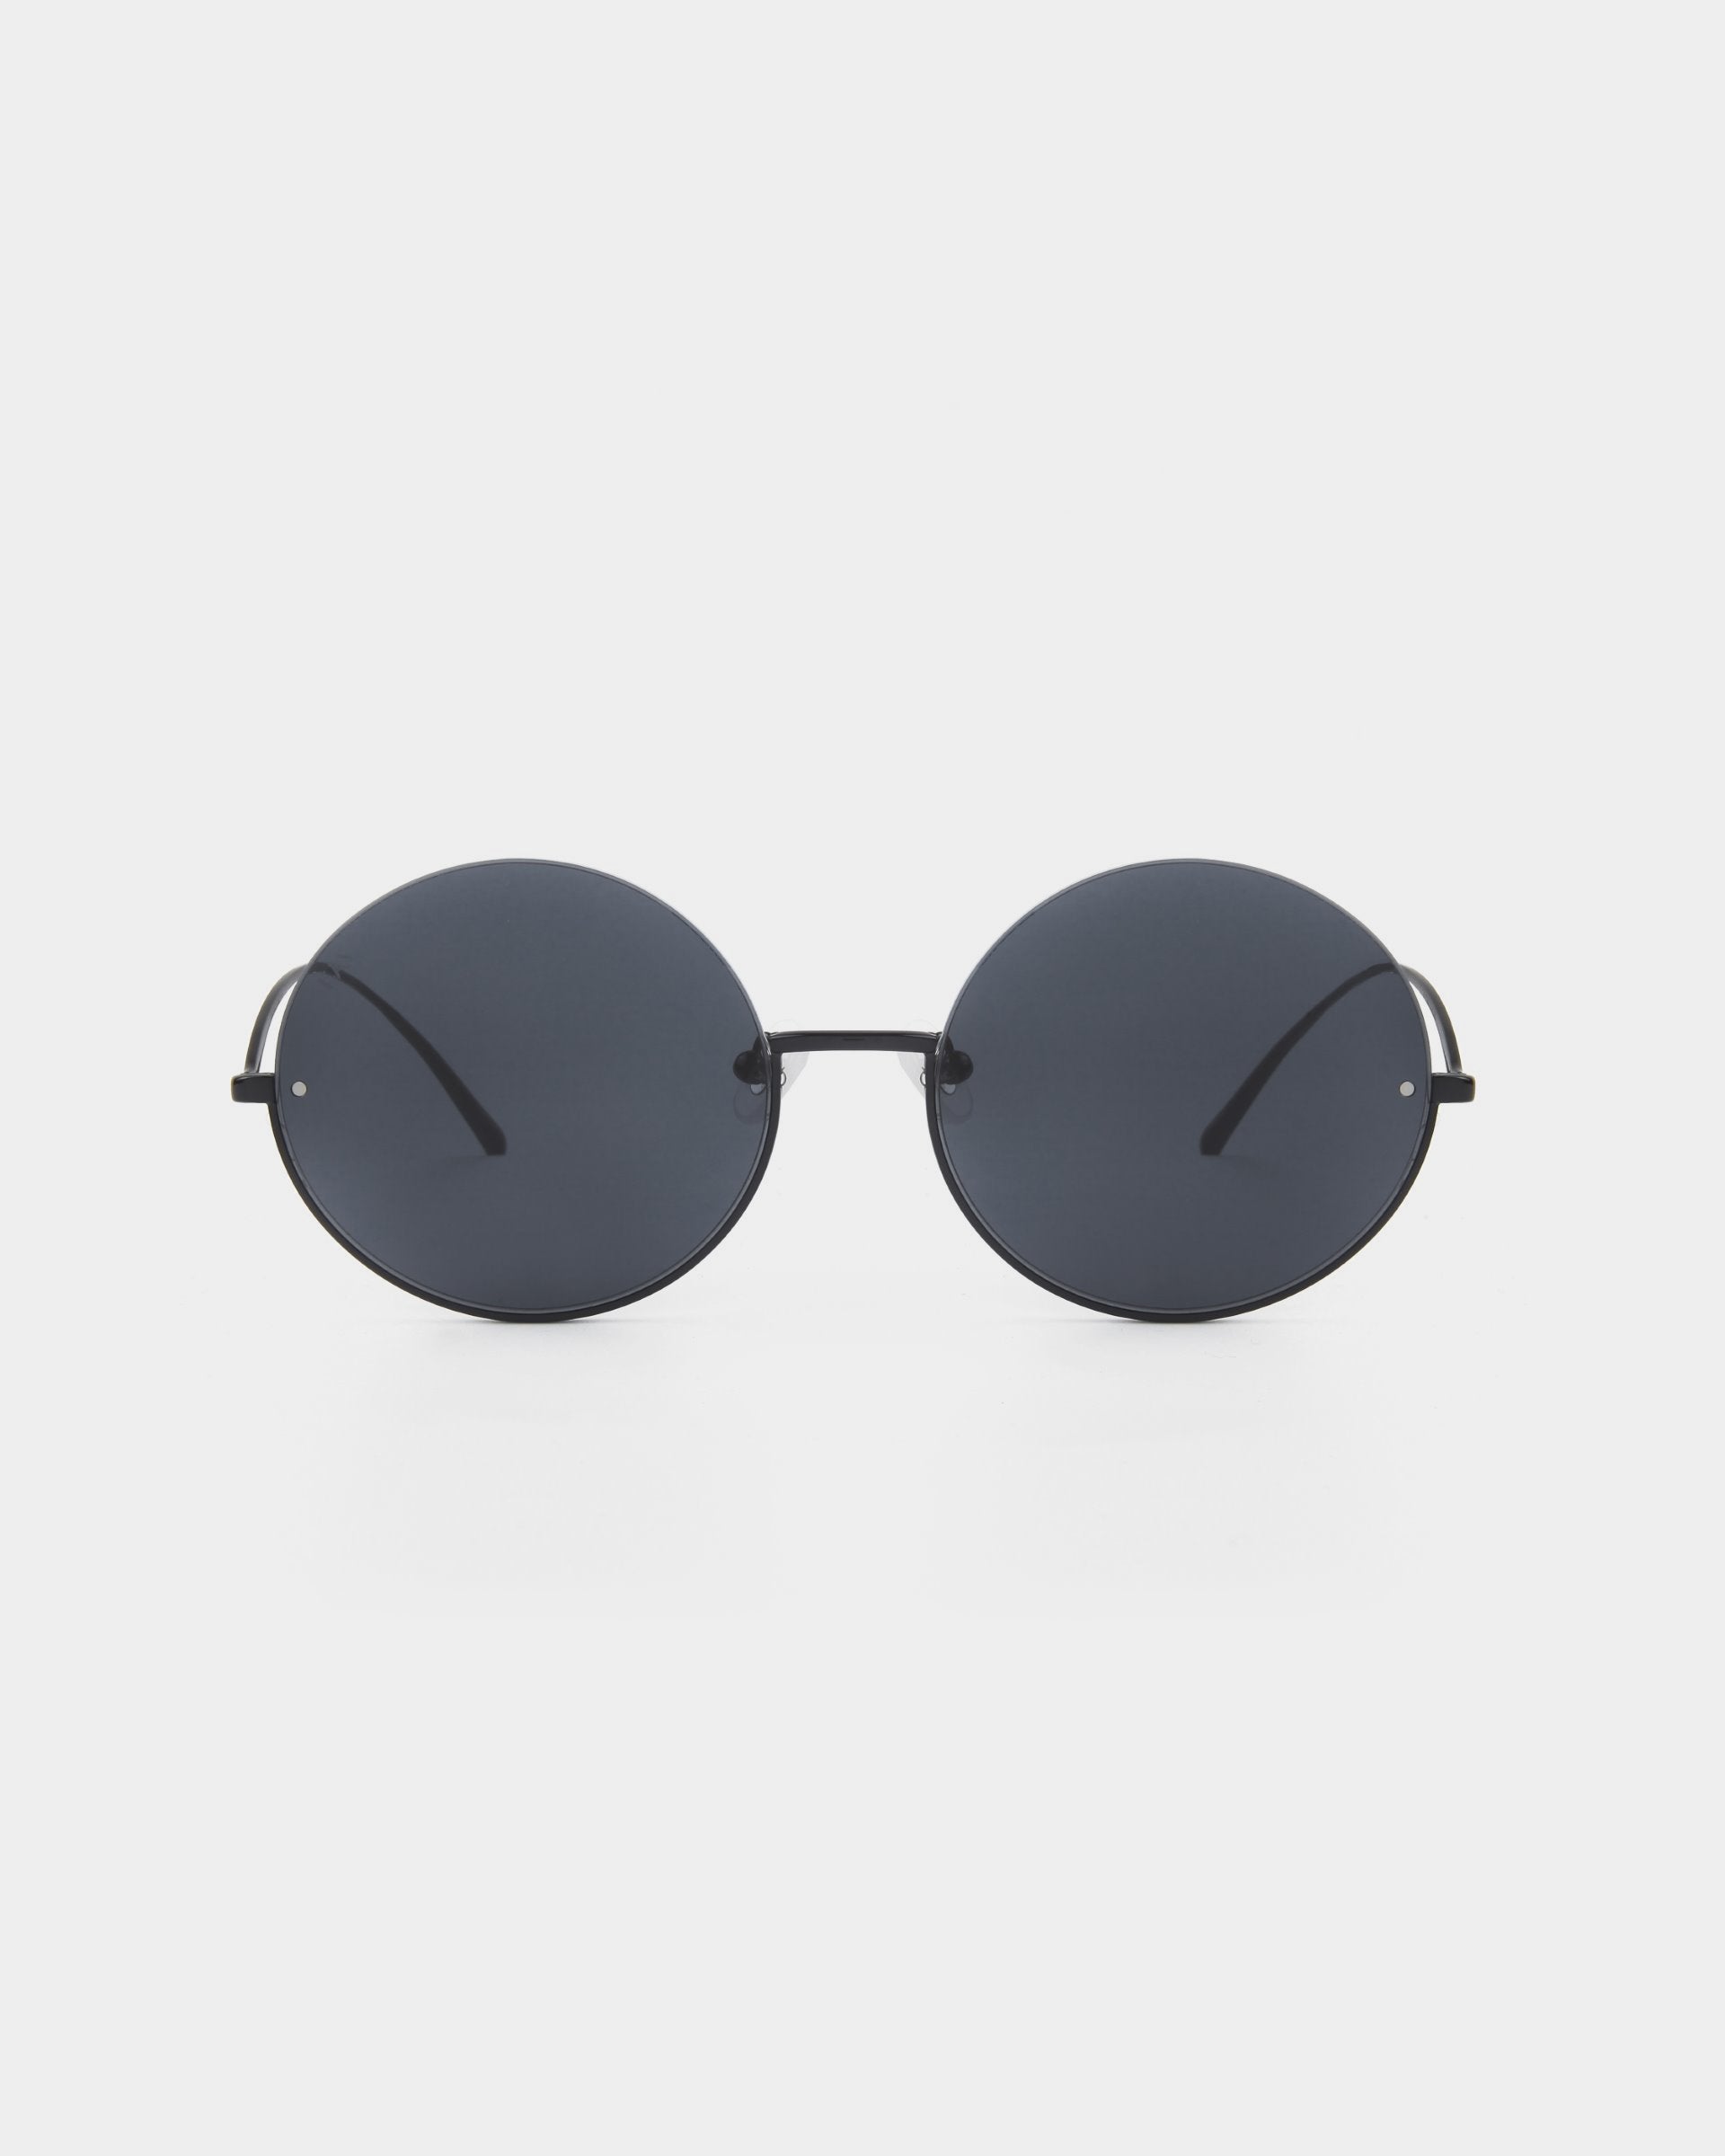 A pair of round, dark-tinted For Art's Sake® Oceana sunglasses with thin stainless steel frames is centered against a white background. The minimalist design features simple, straight temples and nose pads, giving them a sleek and modern look while offering UVA & UVB protection.